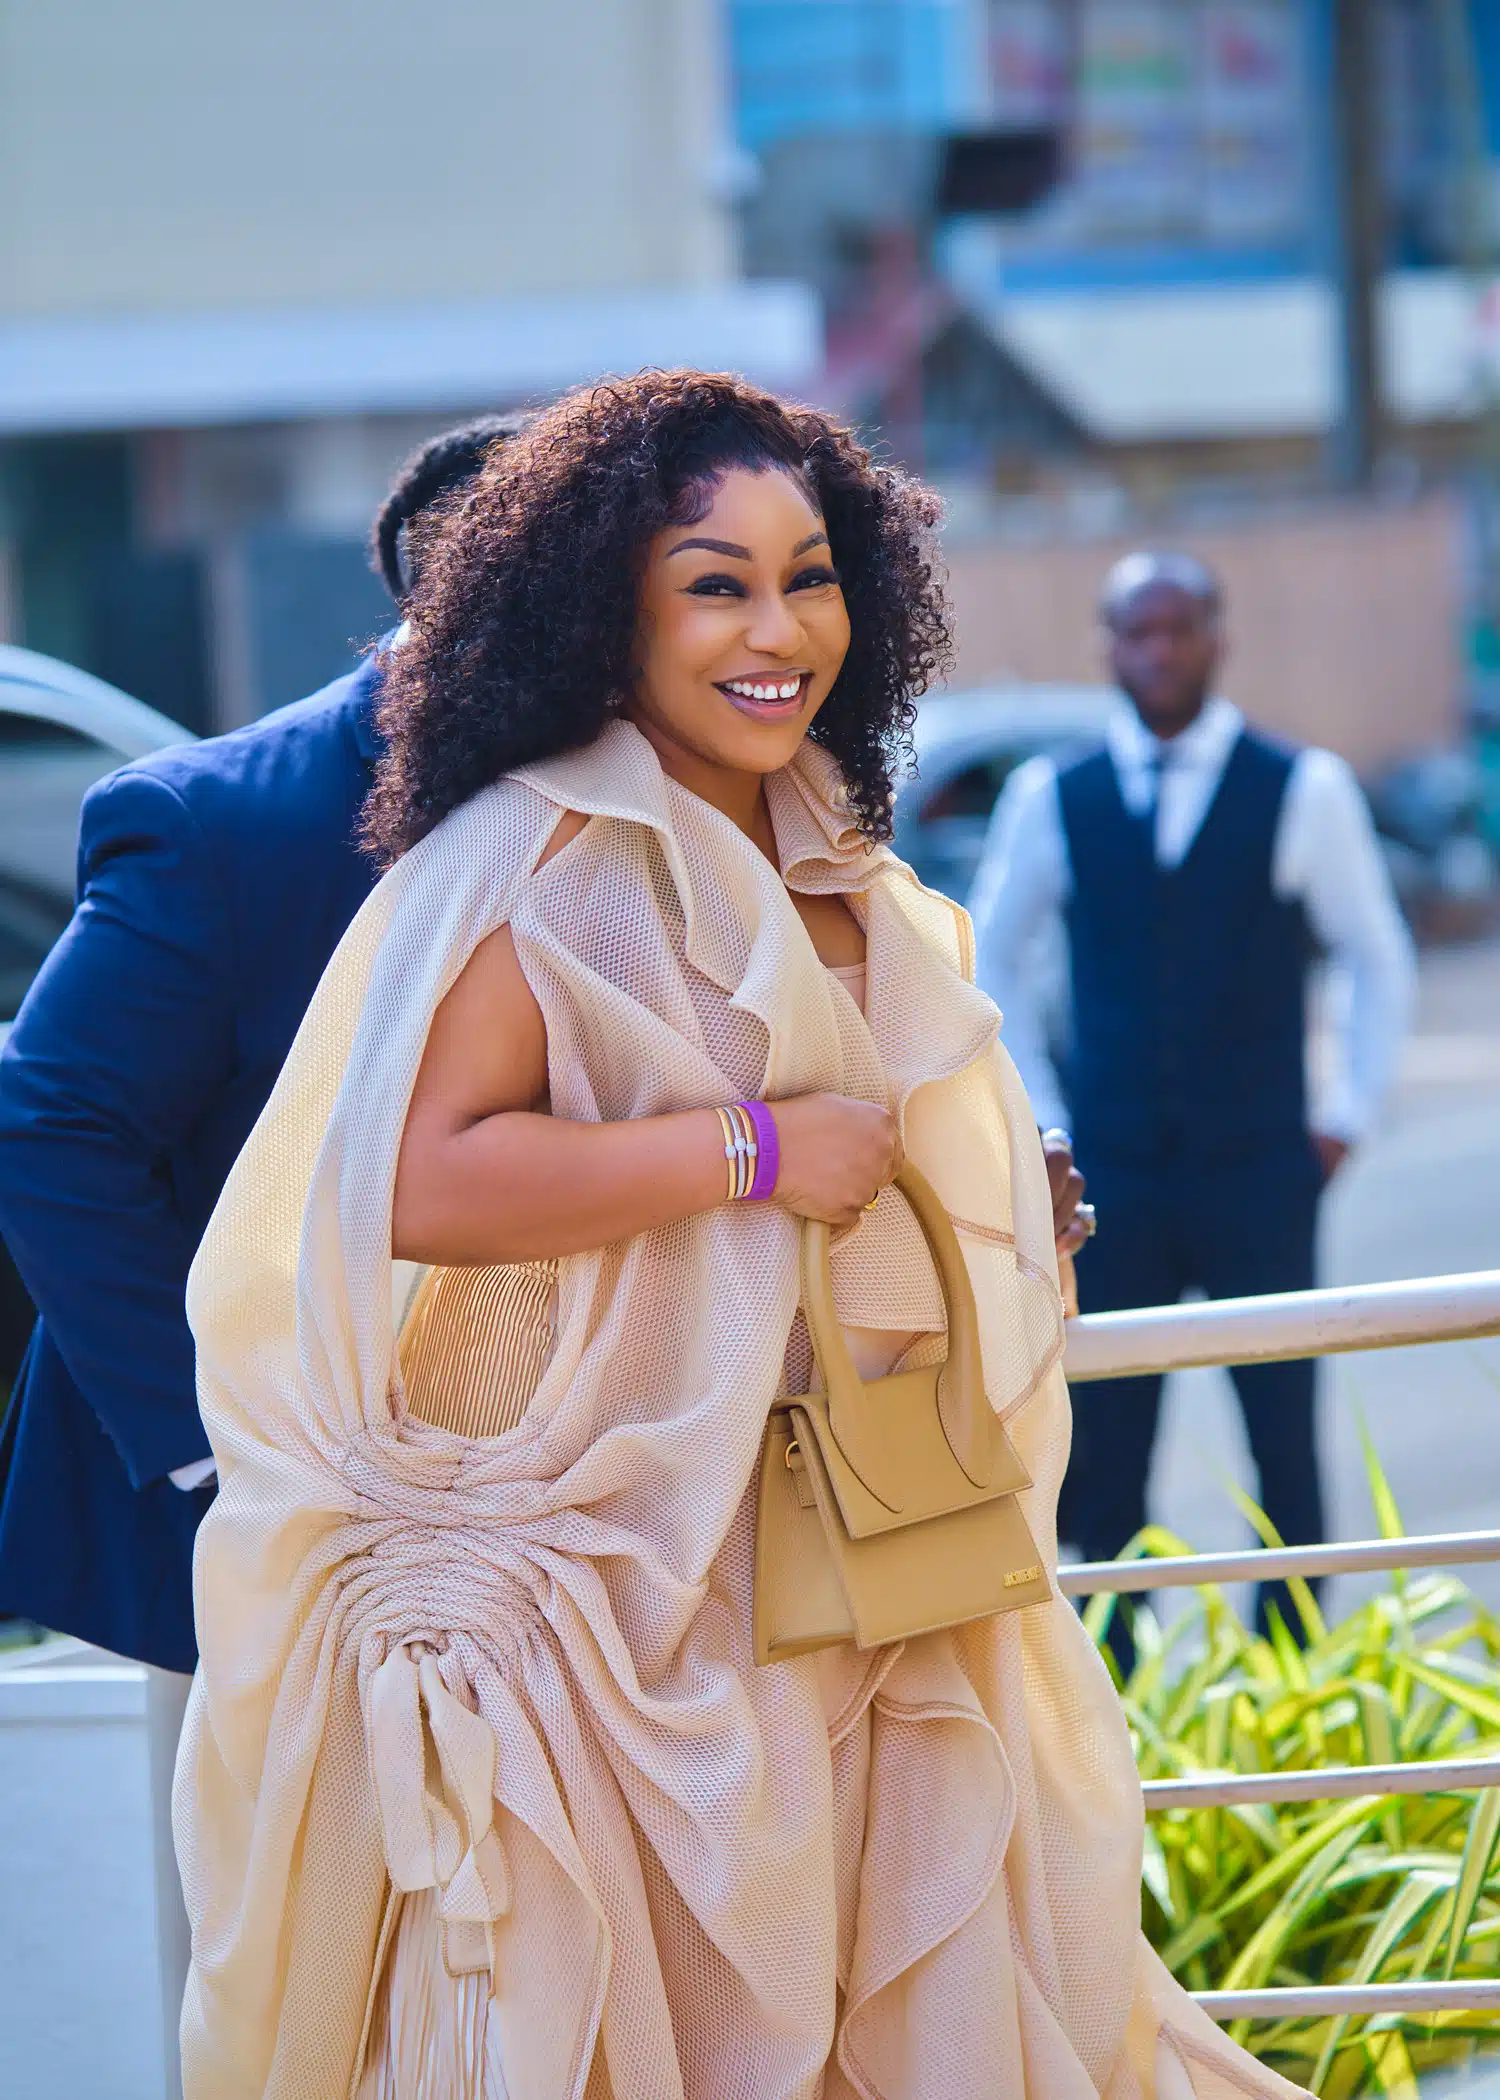 Rita Dominic slams critics after being mocked over new movie role